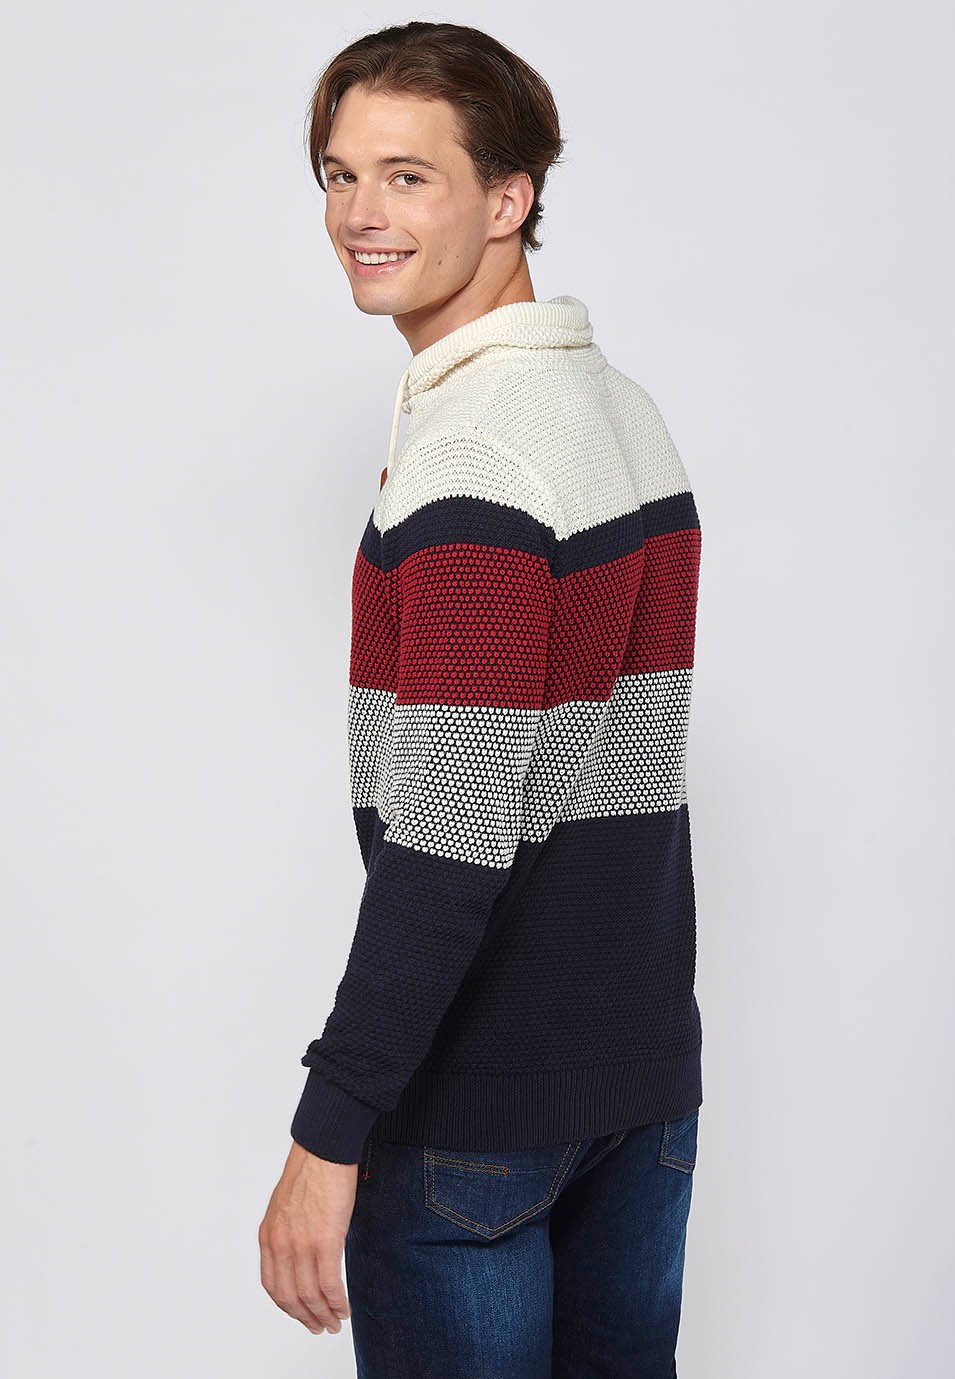 Long-sleeved sweater with adjustable turtleneck with drawstring, navy cotton textured striped tricot for men 5